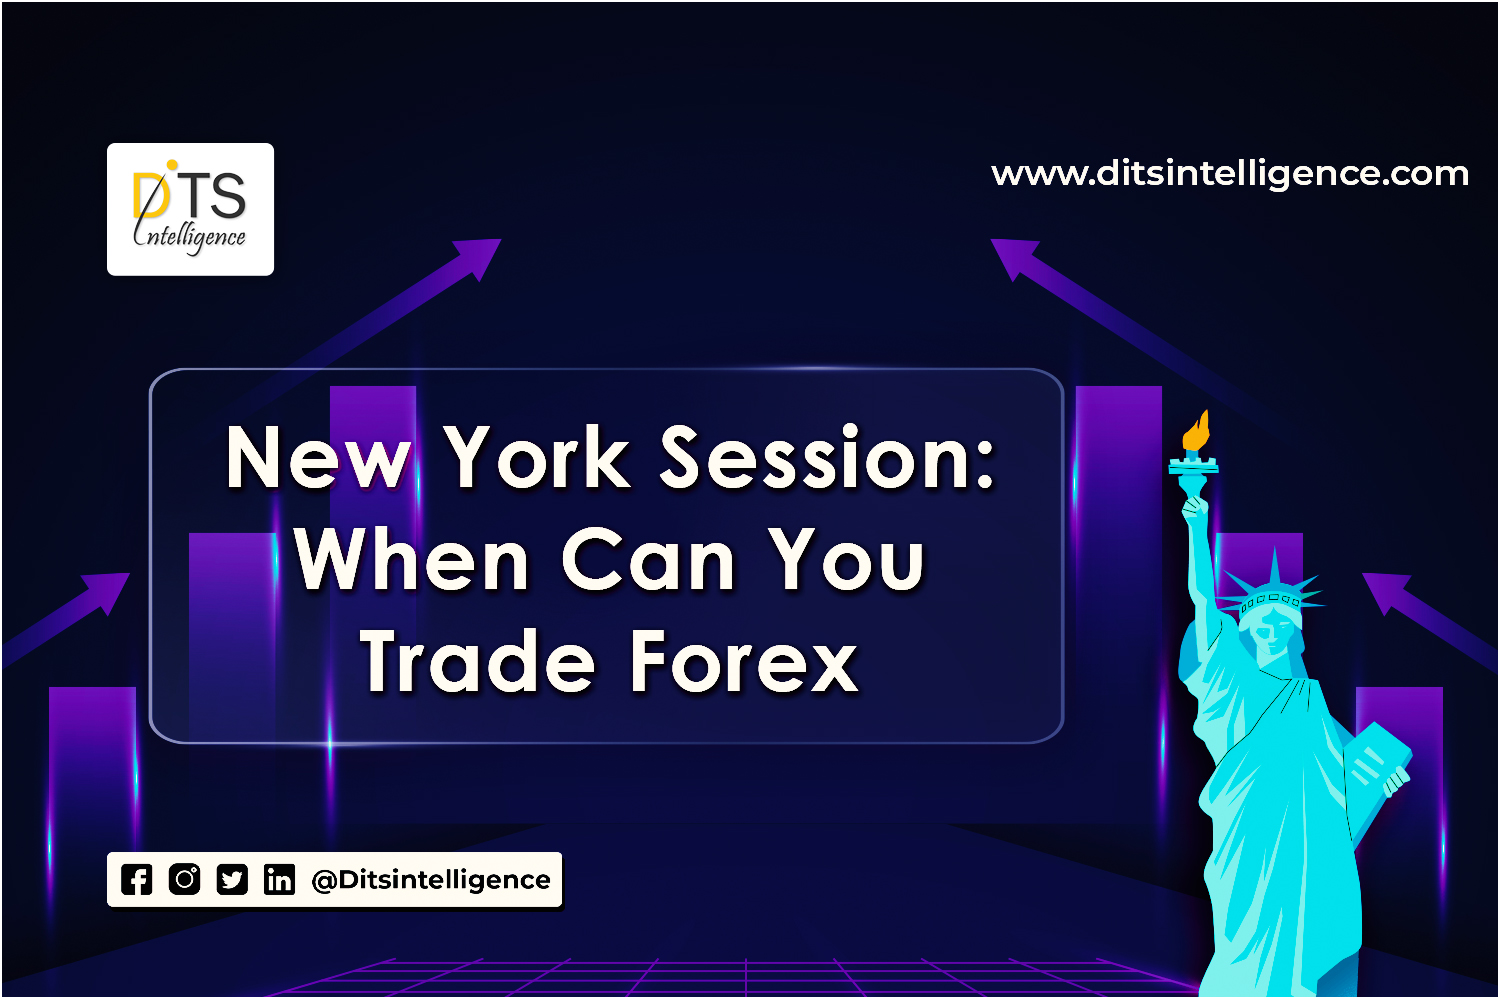 New York Session: When Can You Trade Forex